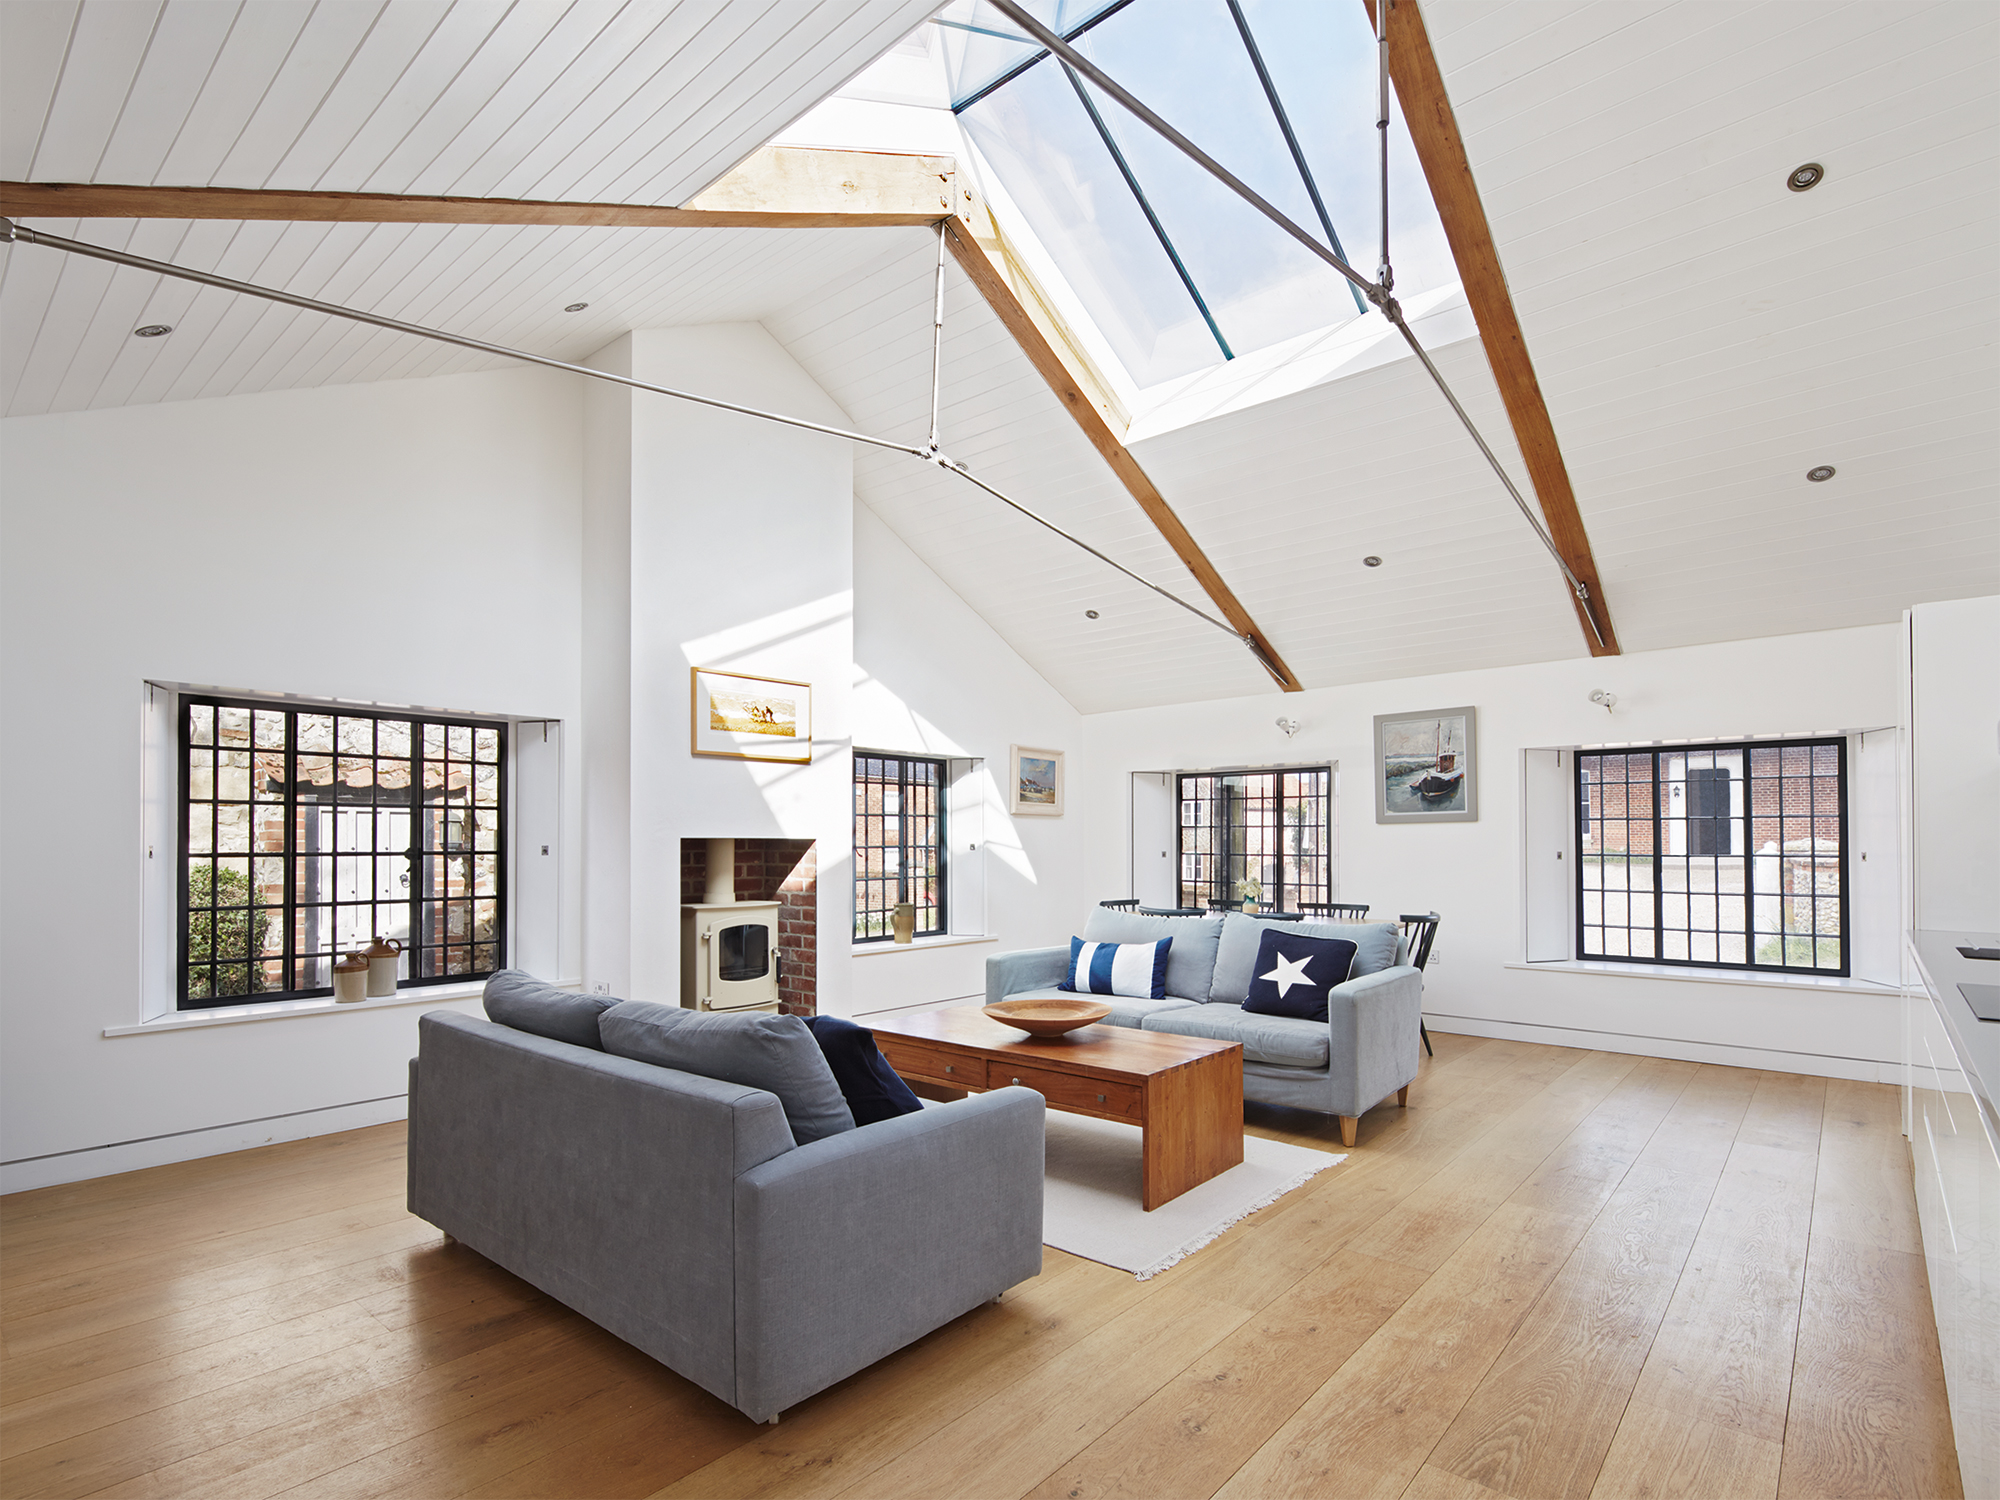 Living room of converted boathouse with large skylight